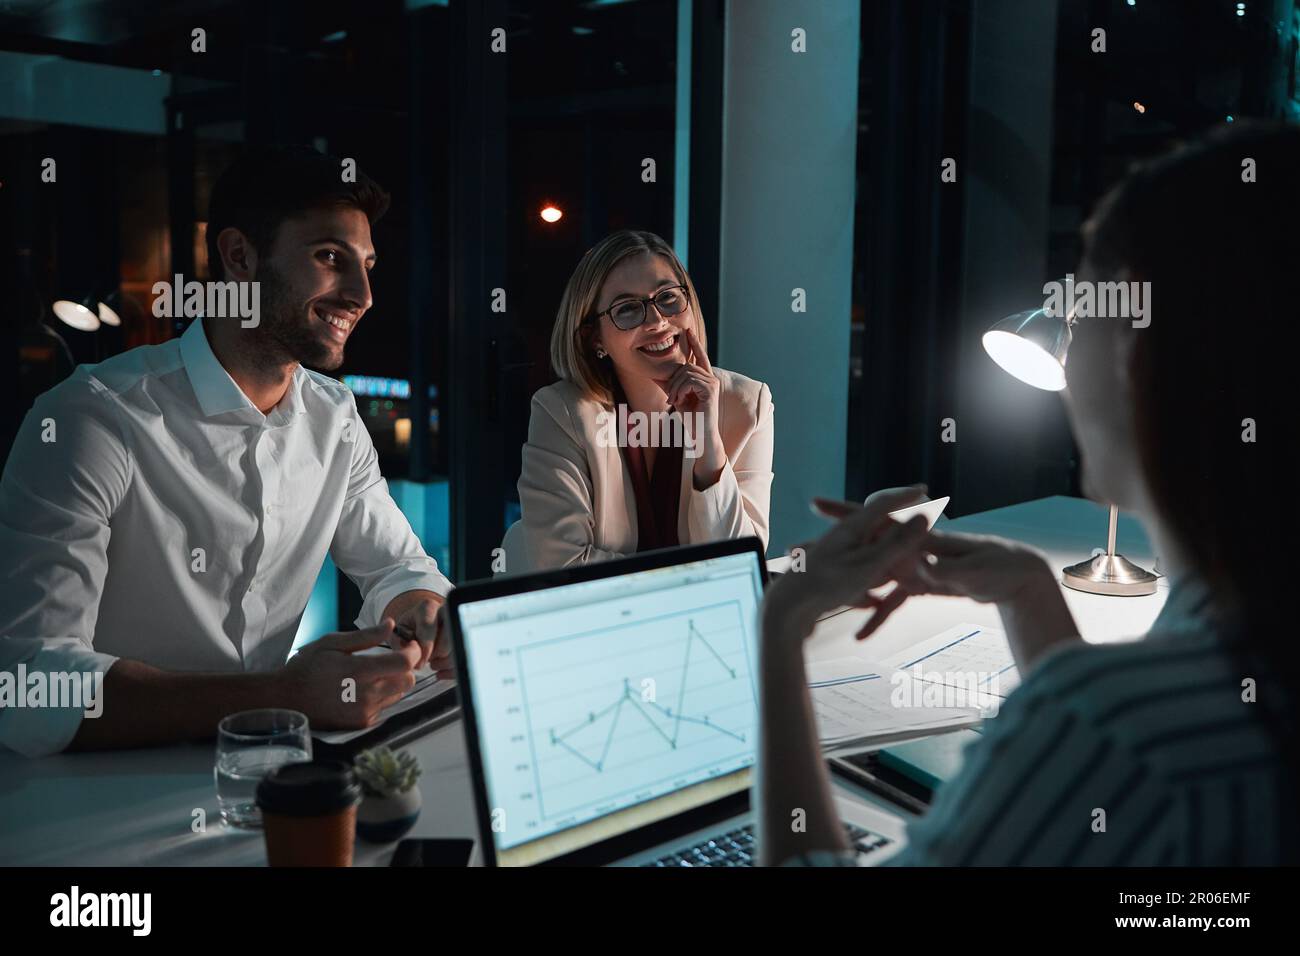 Slaying the deadline with teamwork and hard work. colleagues having a meeting during a late night in a modern office. Stock Photo